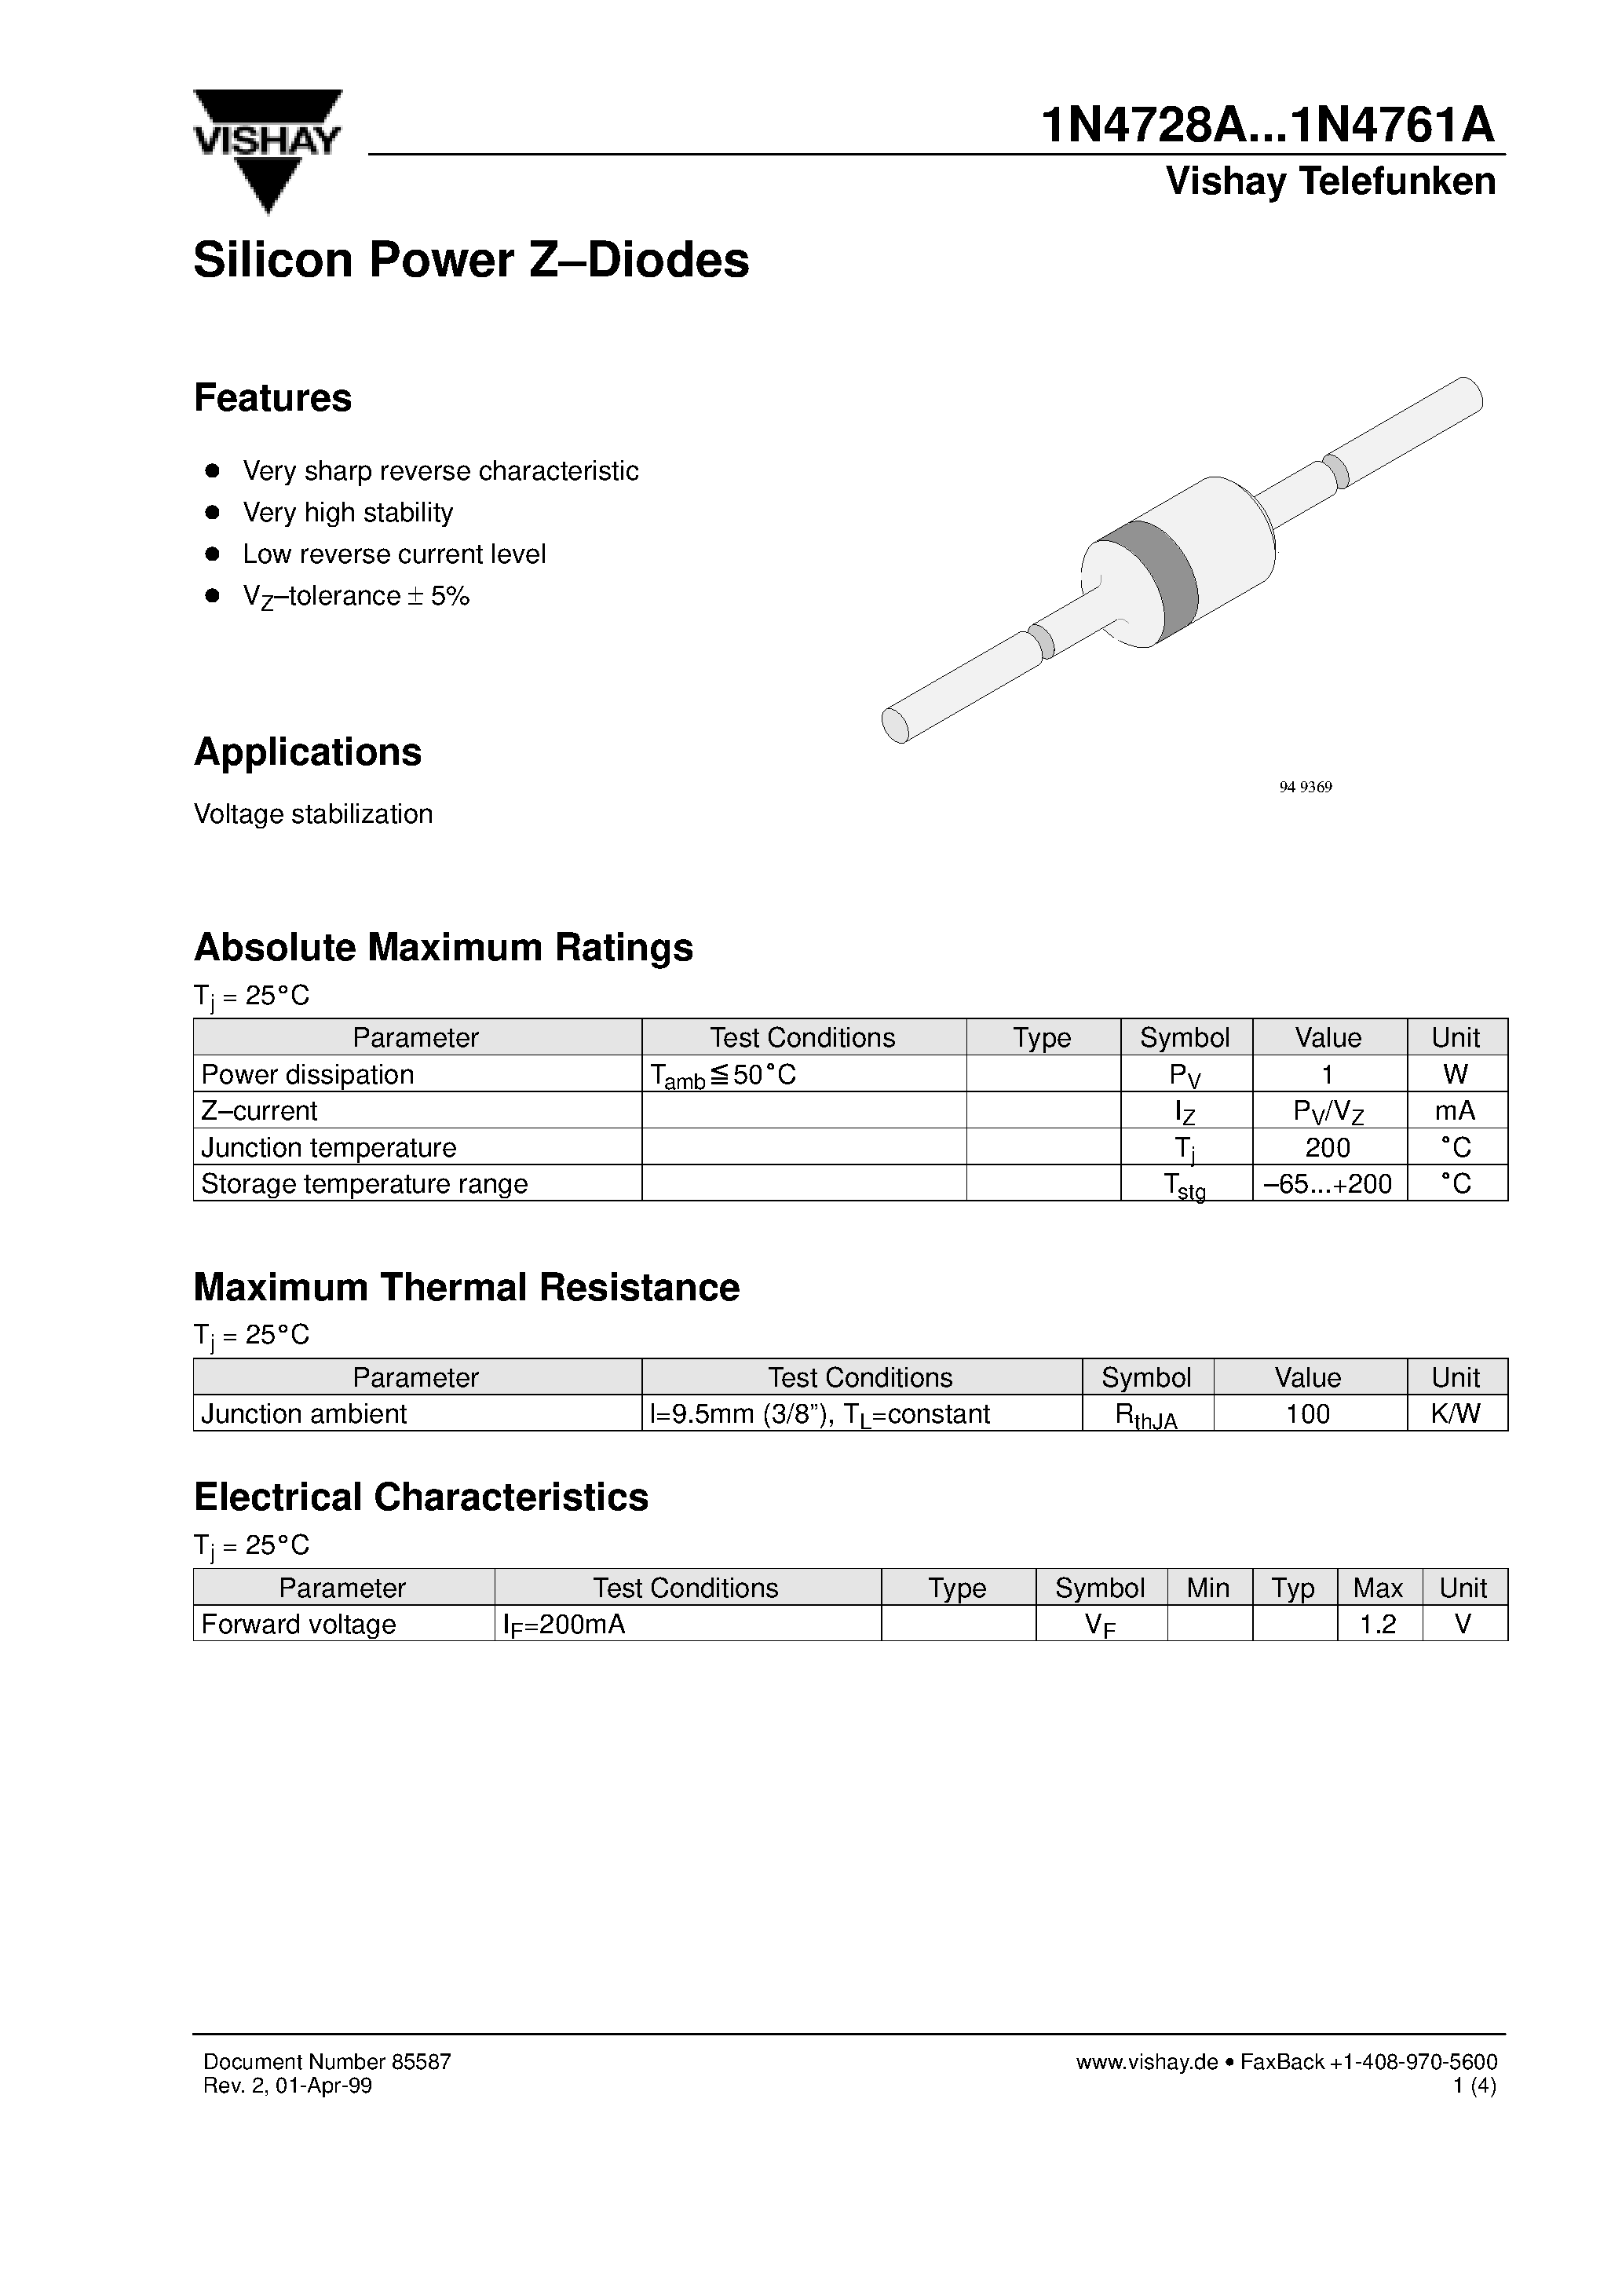 Даташит 1N4750A - Silicon Power Z-Diodes страница 1